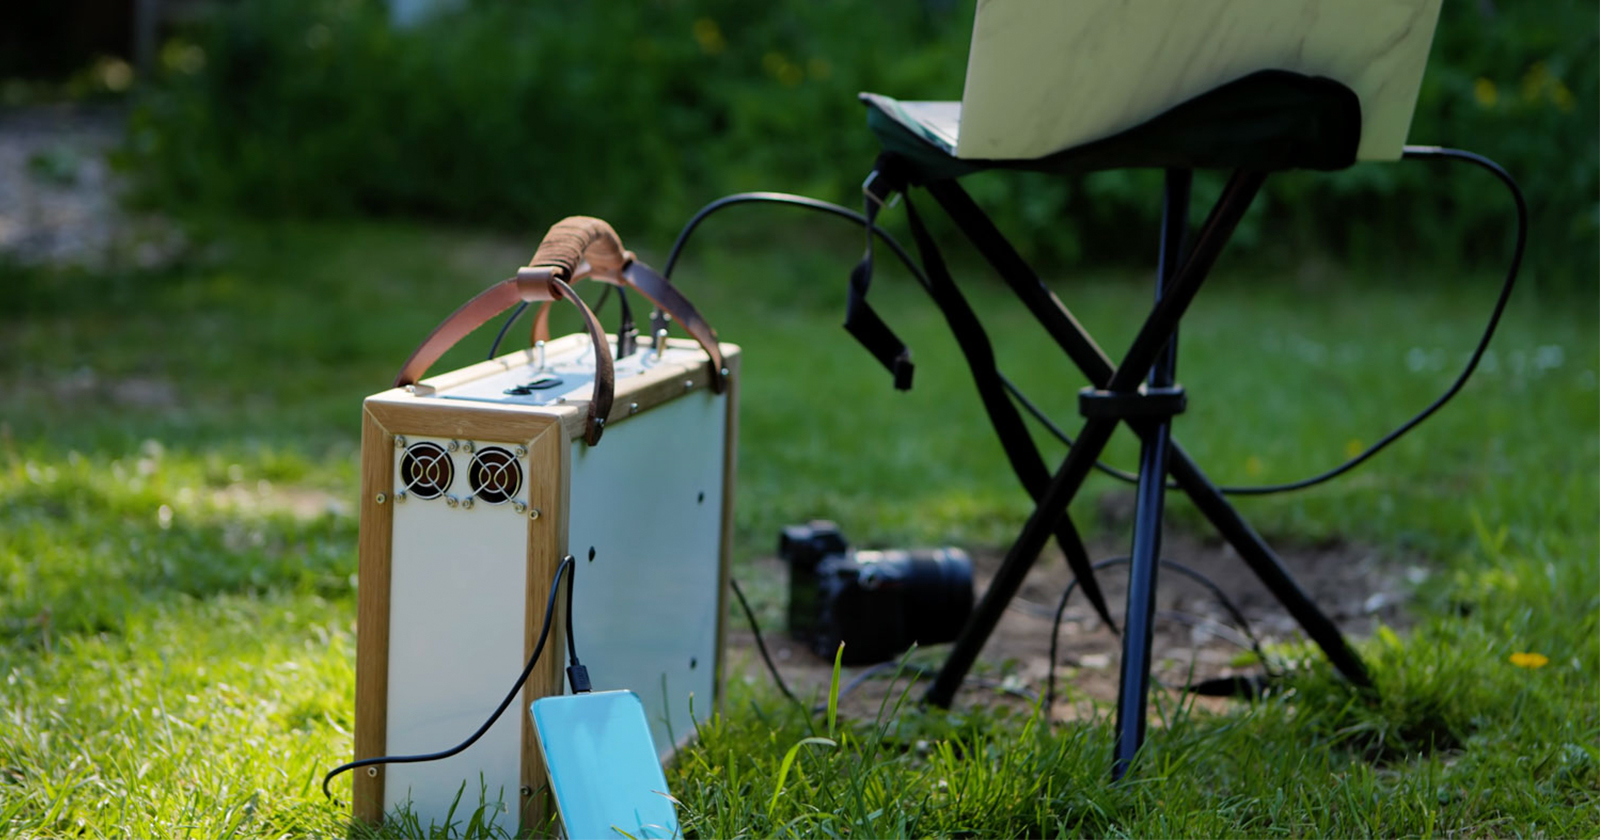 This DIY Portable Power Station Can Keep Tons of Photo Gear Charged